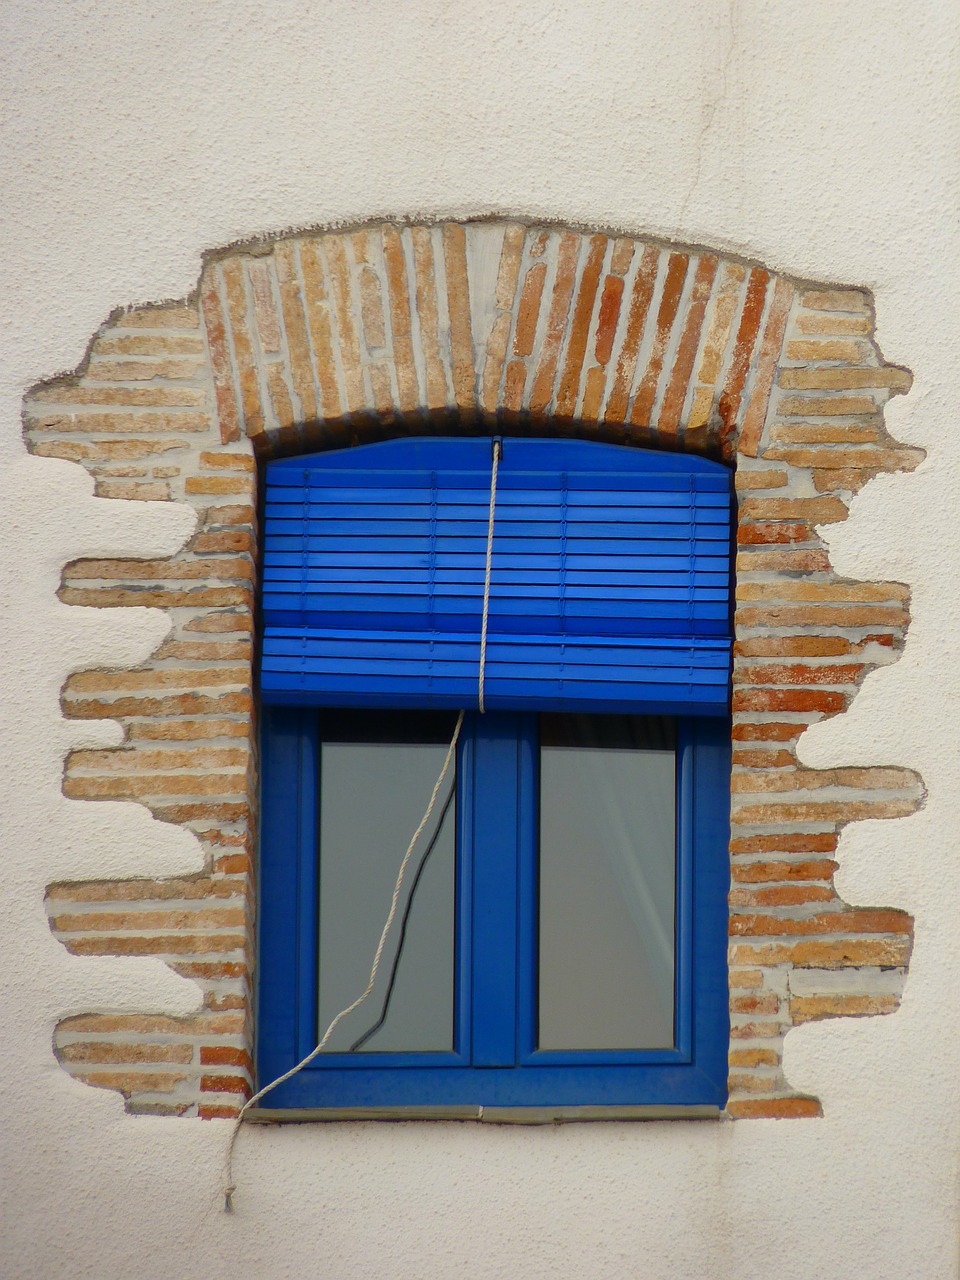 window,roller blind,blinds,blue,facade,building,free pictures, free photos, free images, royalty free, free illustrations, public domain